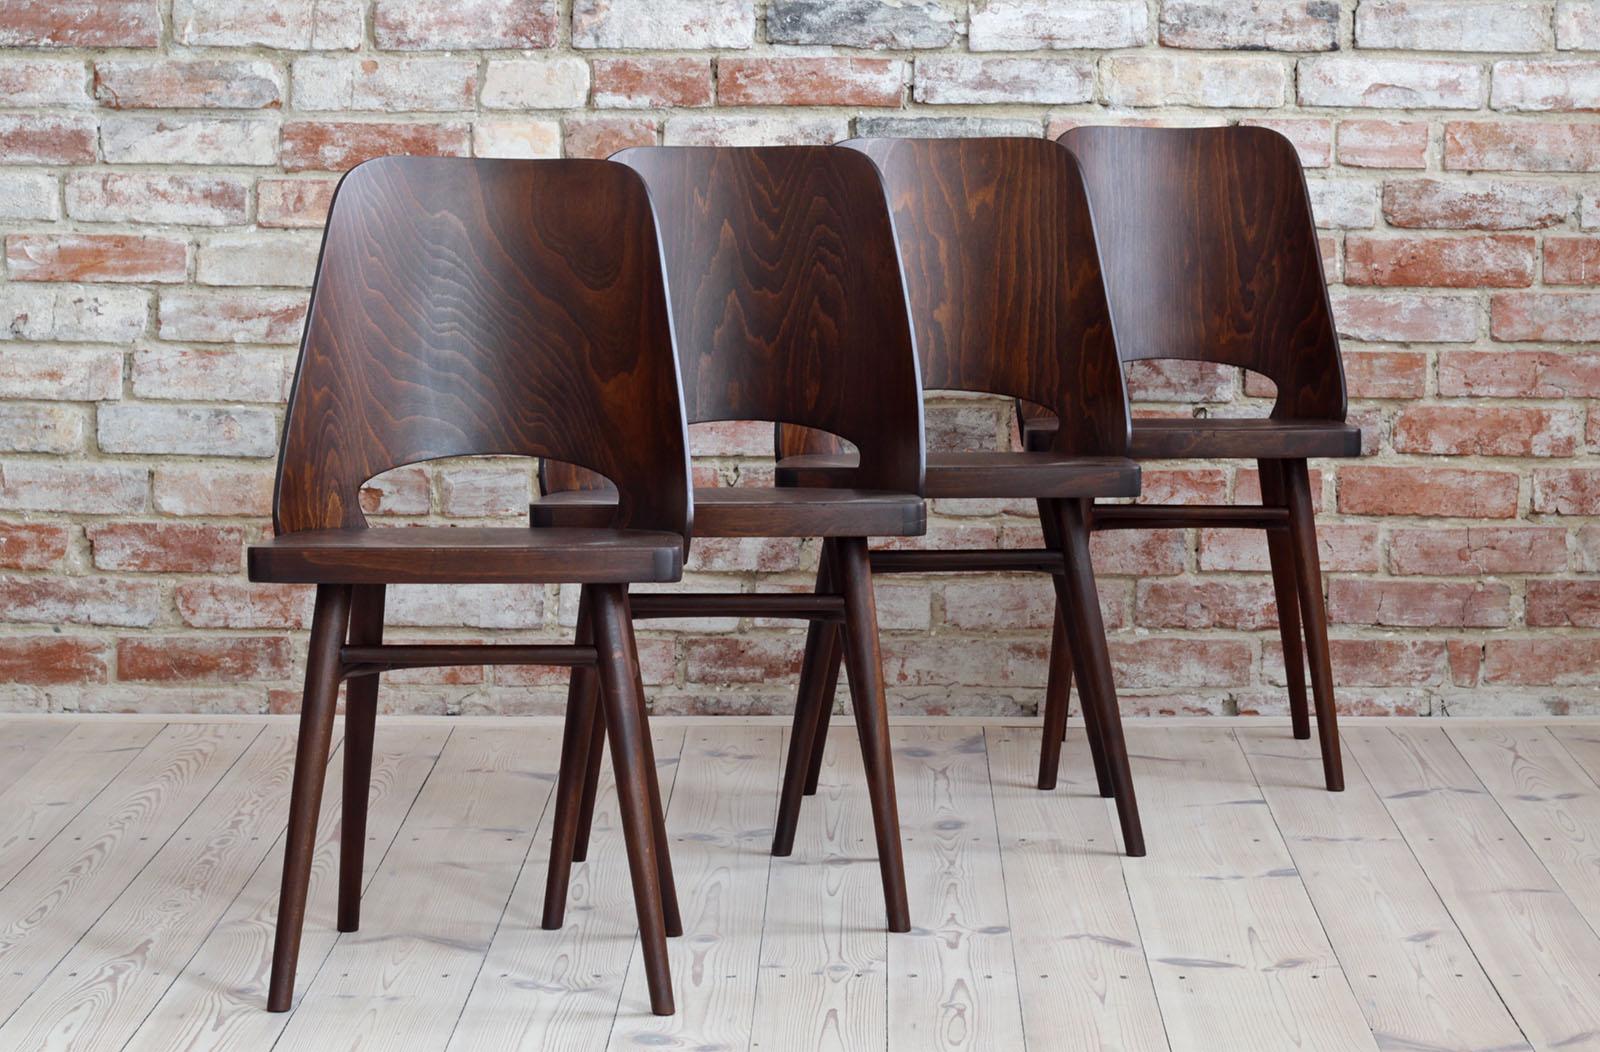 Set of 6 chairs designed by Oswald Haerdtl. The chairs are after complete renovation, have been cleaned, polished and refinished in natural oil which gave them a warm and natural look. They are veneered with beech wood. Beautiful set for a coffee